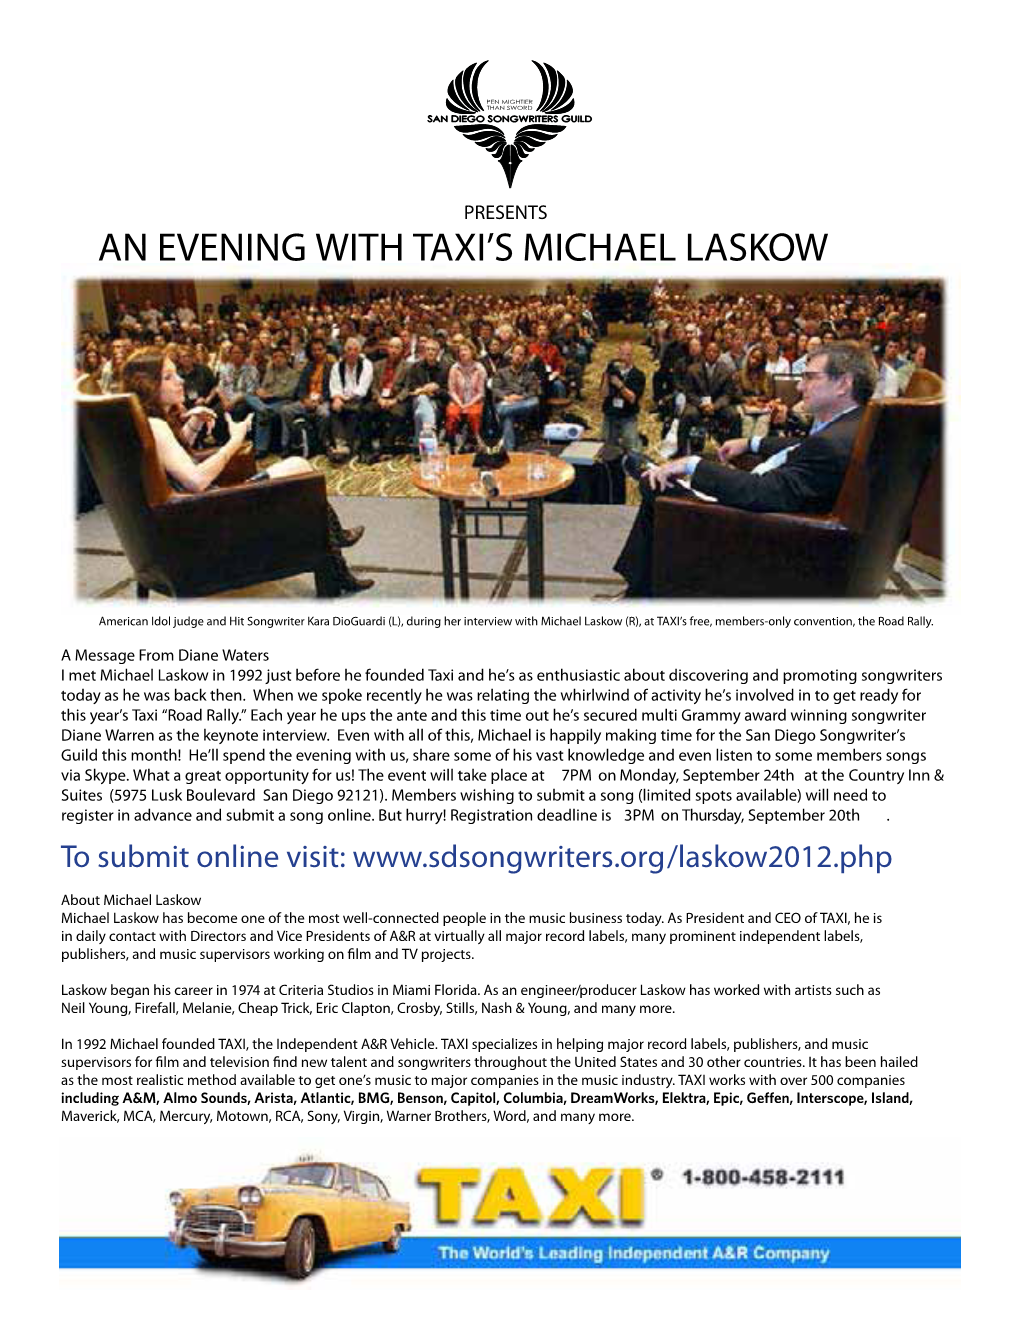 An Evening with Taxi's Michael Laskow